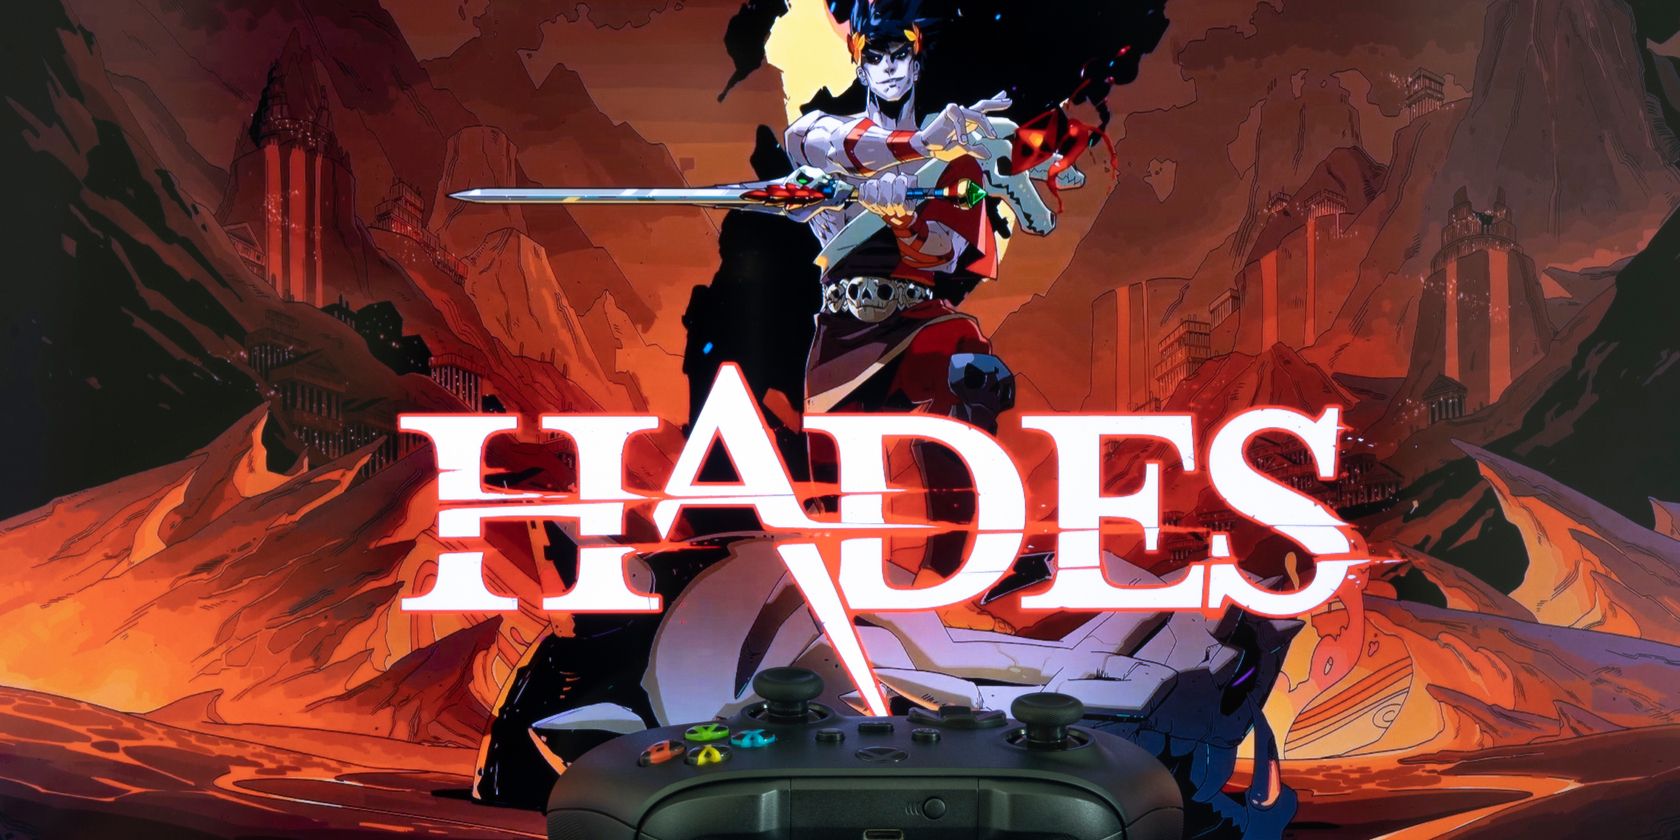 Hades game on TV, with an Xbox controller on the table below it